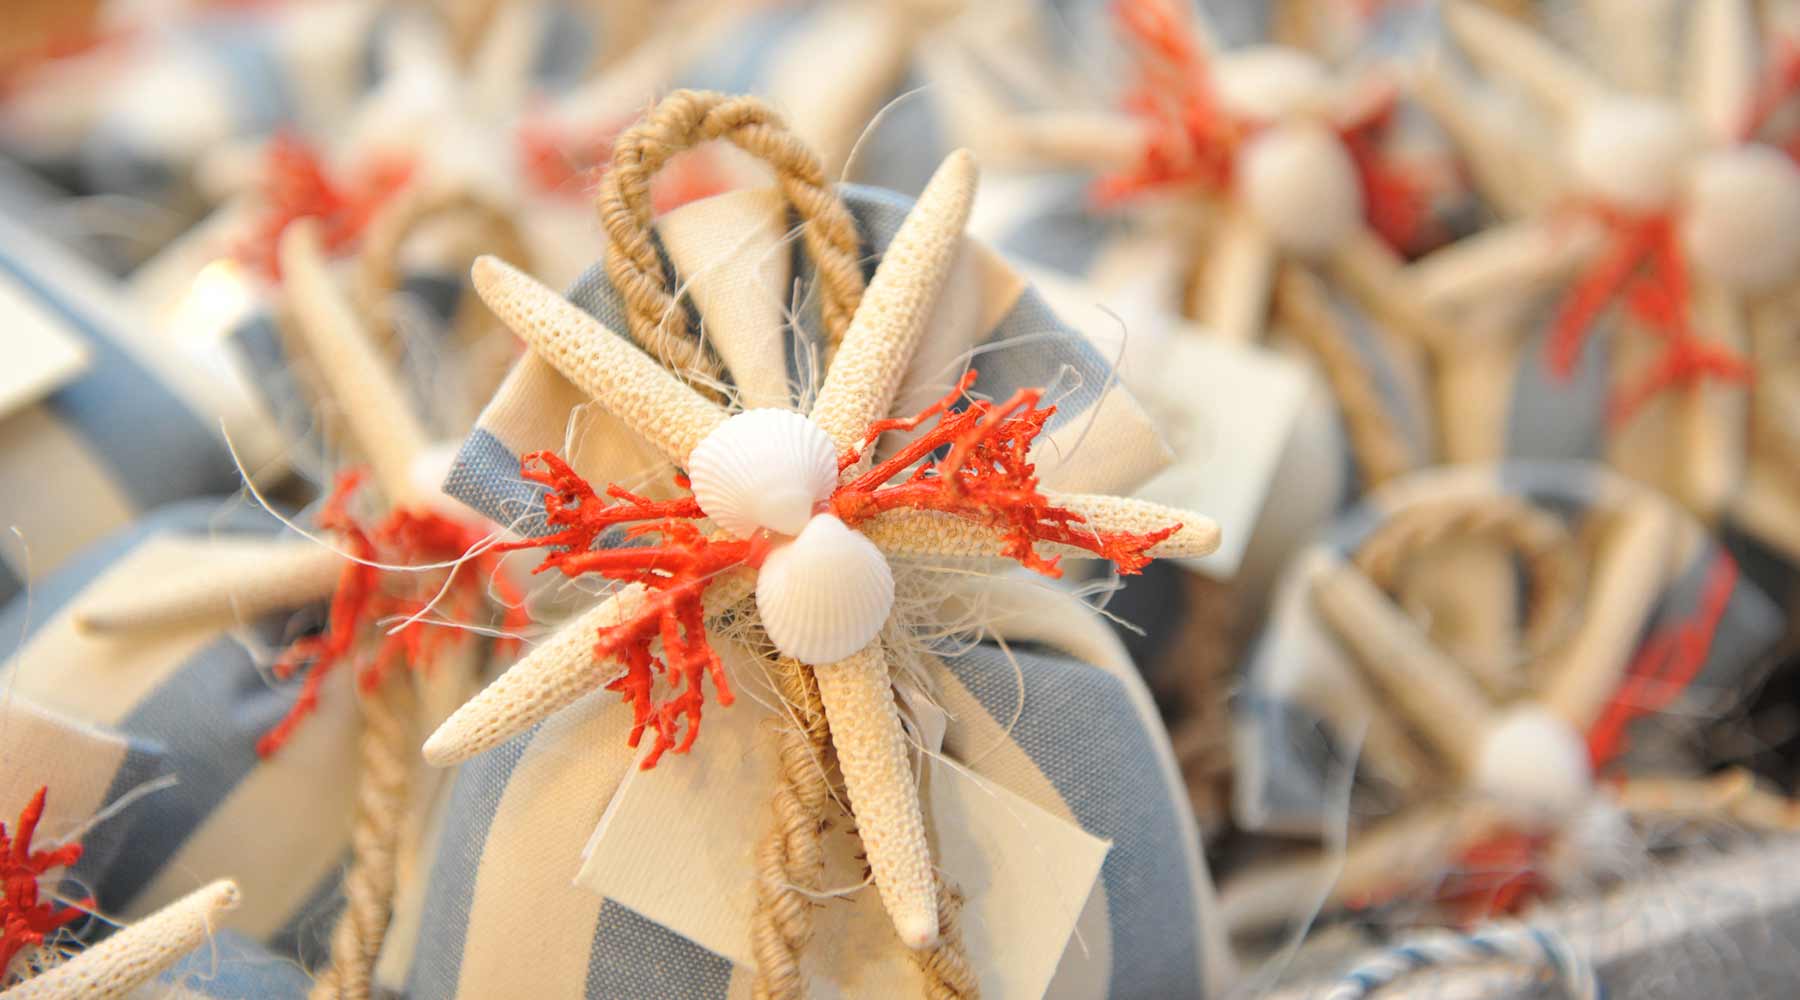 Blue and white striped wedding favor bags are tied shut with a starfish and red coral.